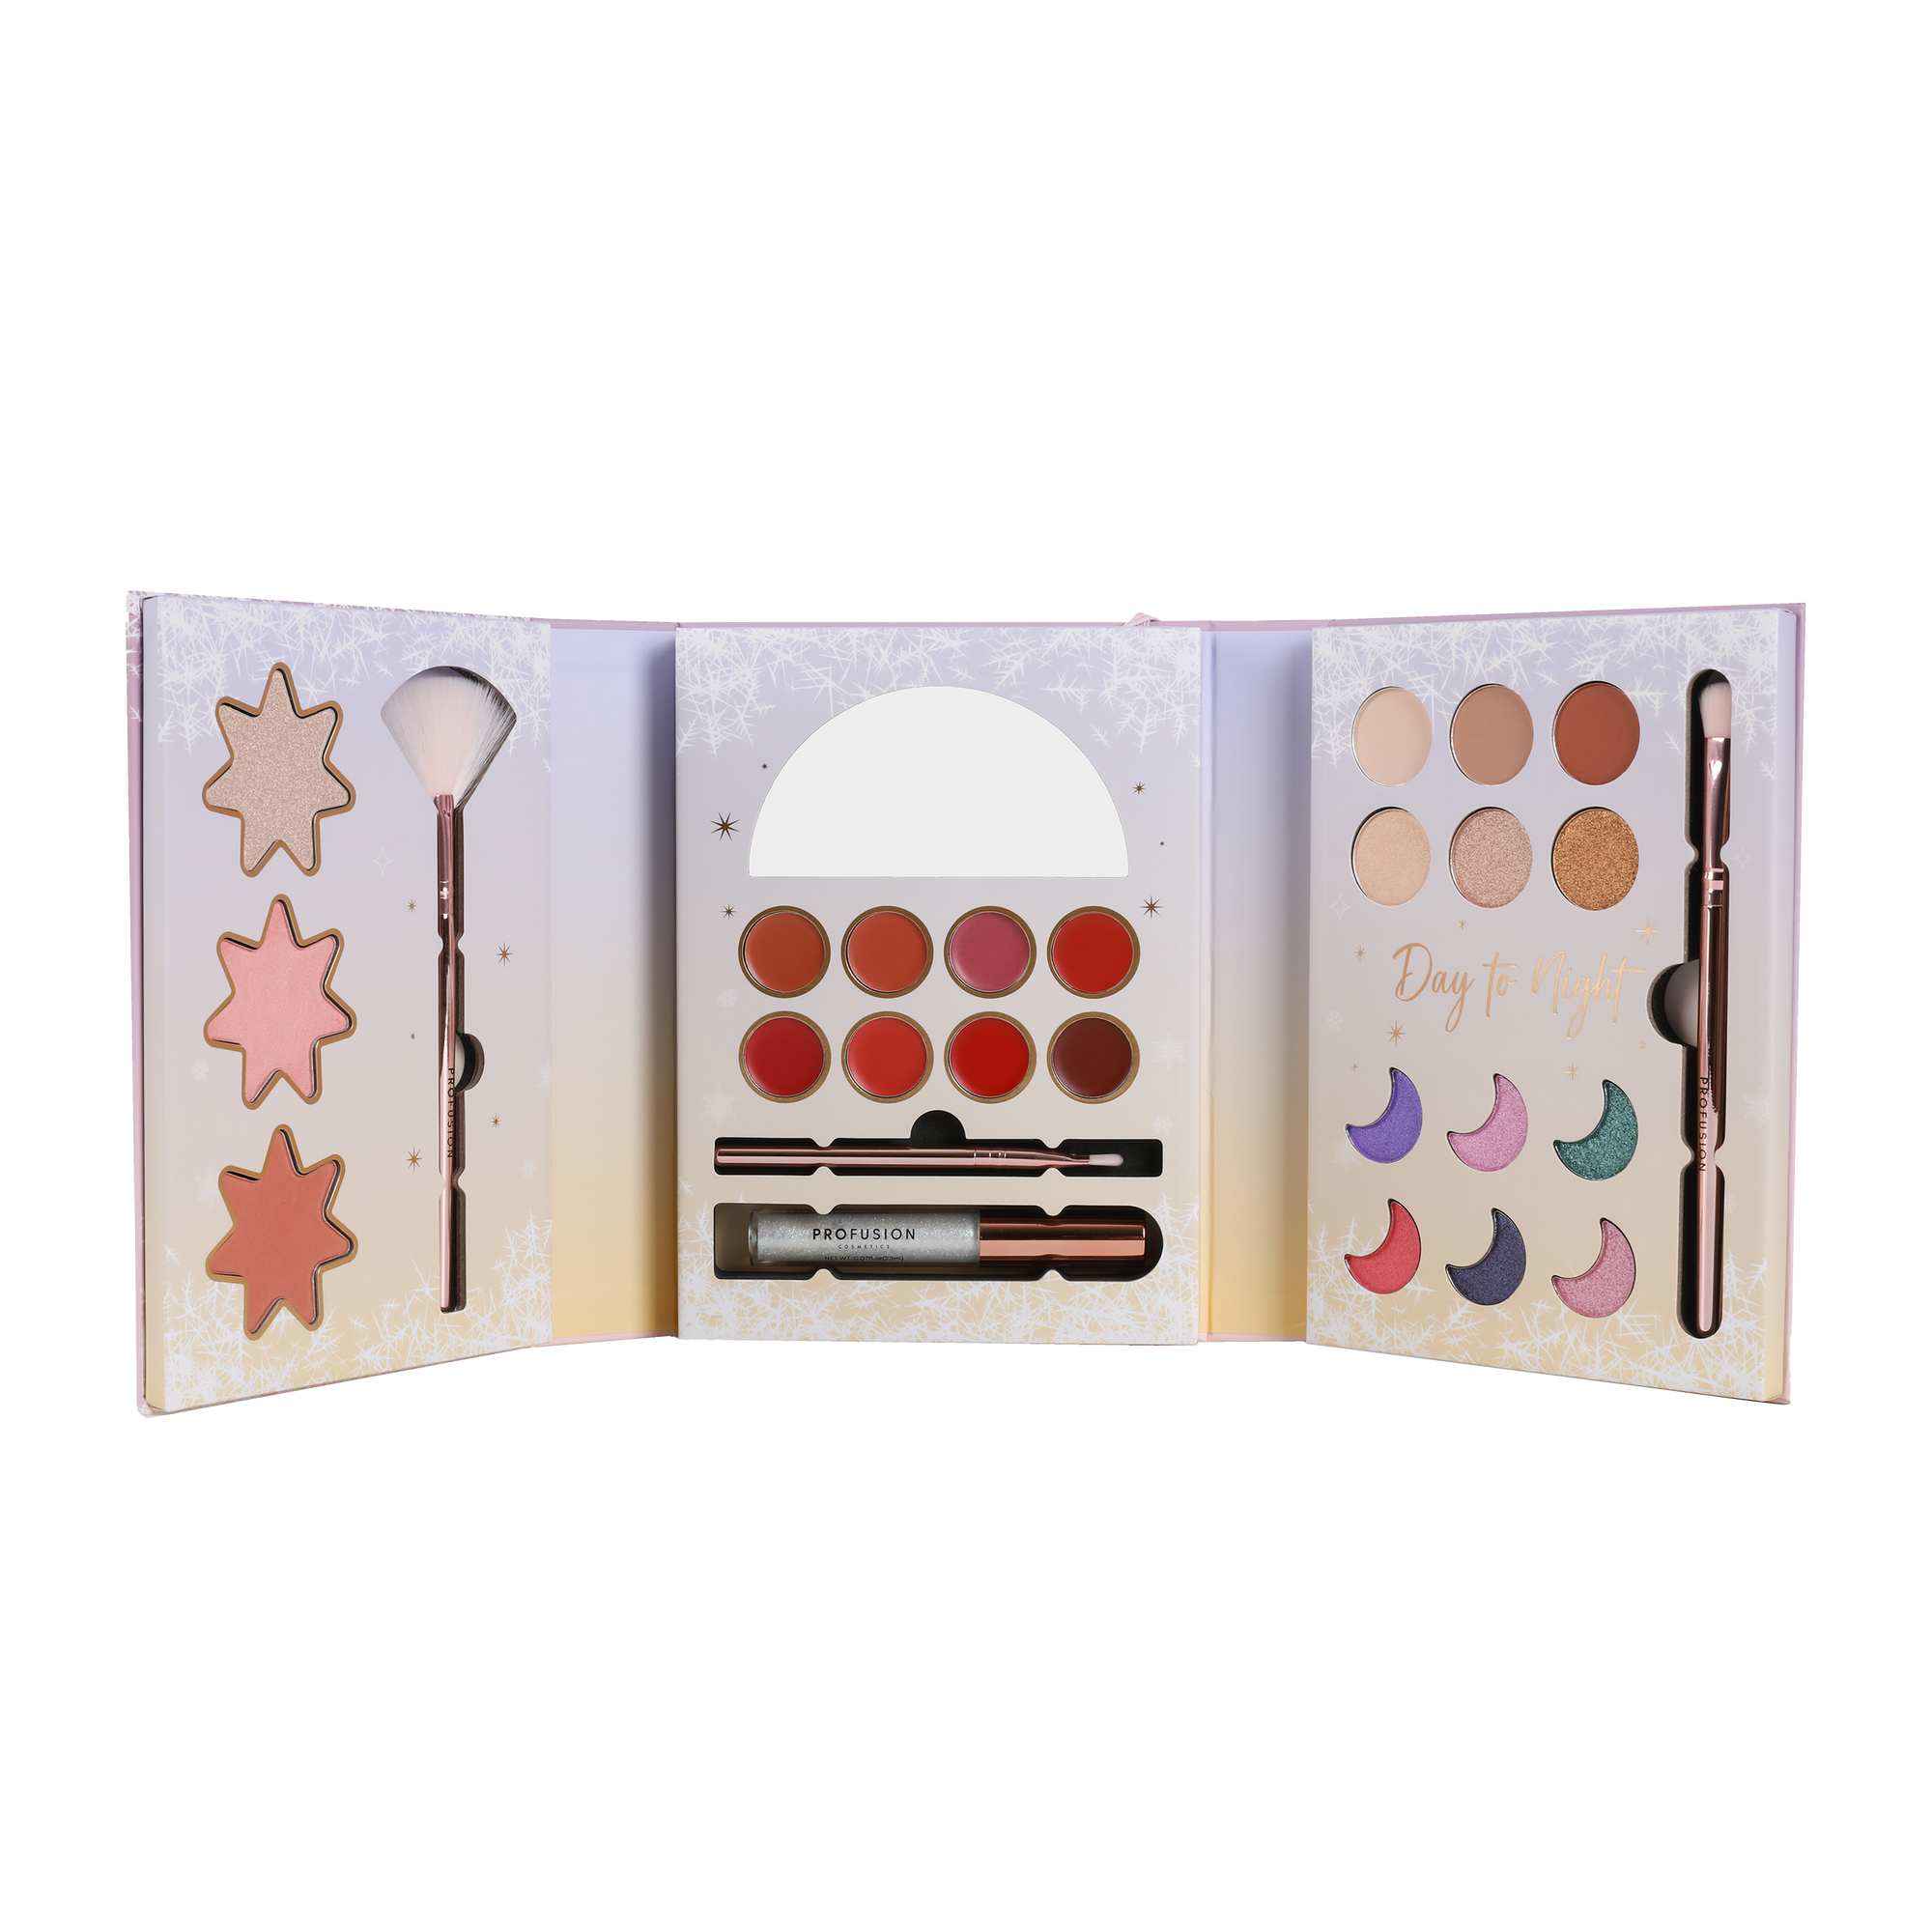 FROSTED SNOW SPARKLE | GET THE GLOW MAKEUP KIT